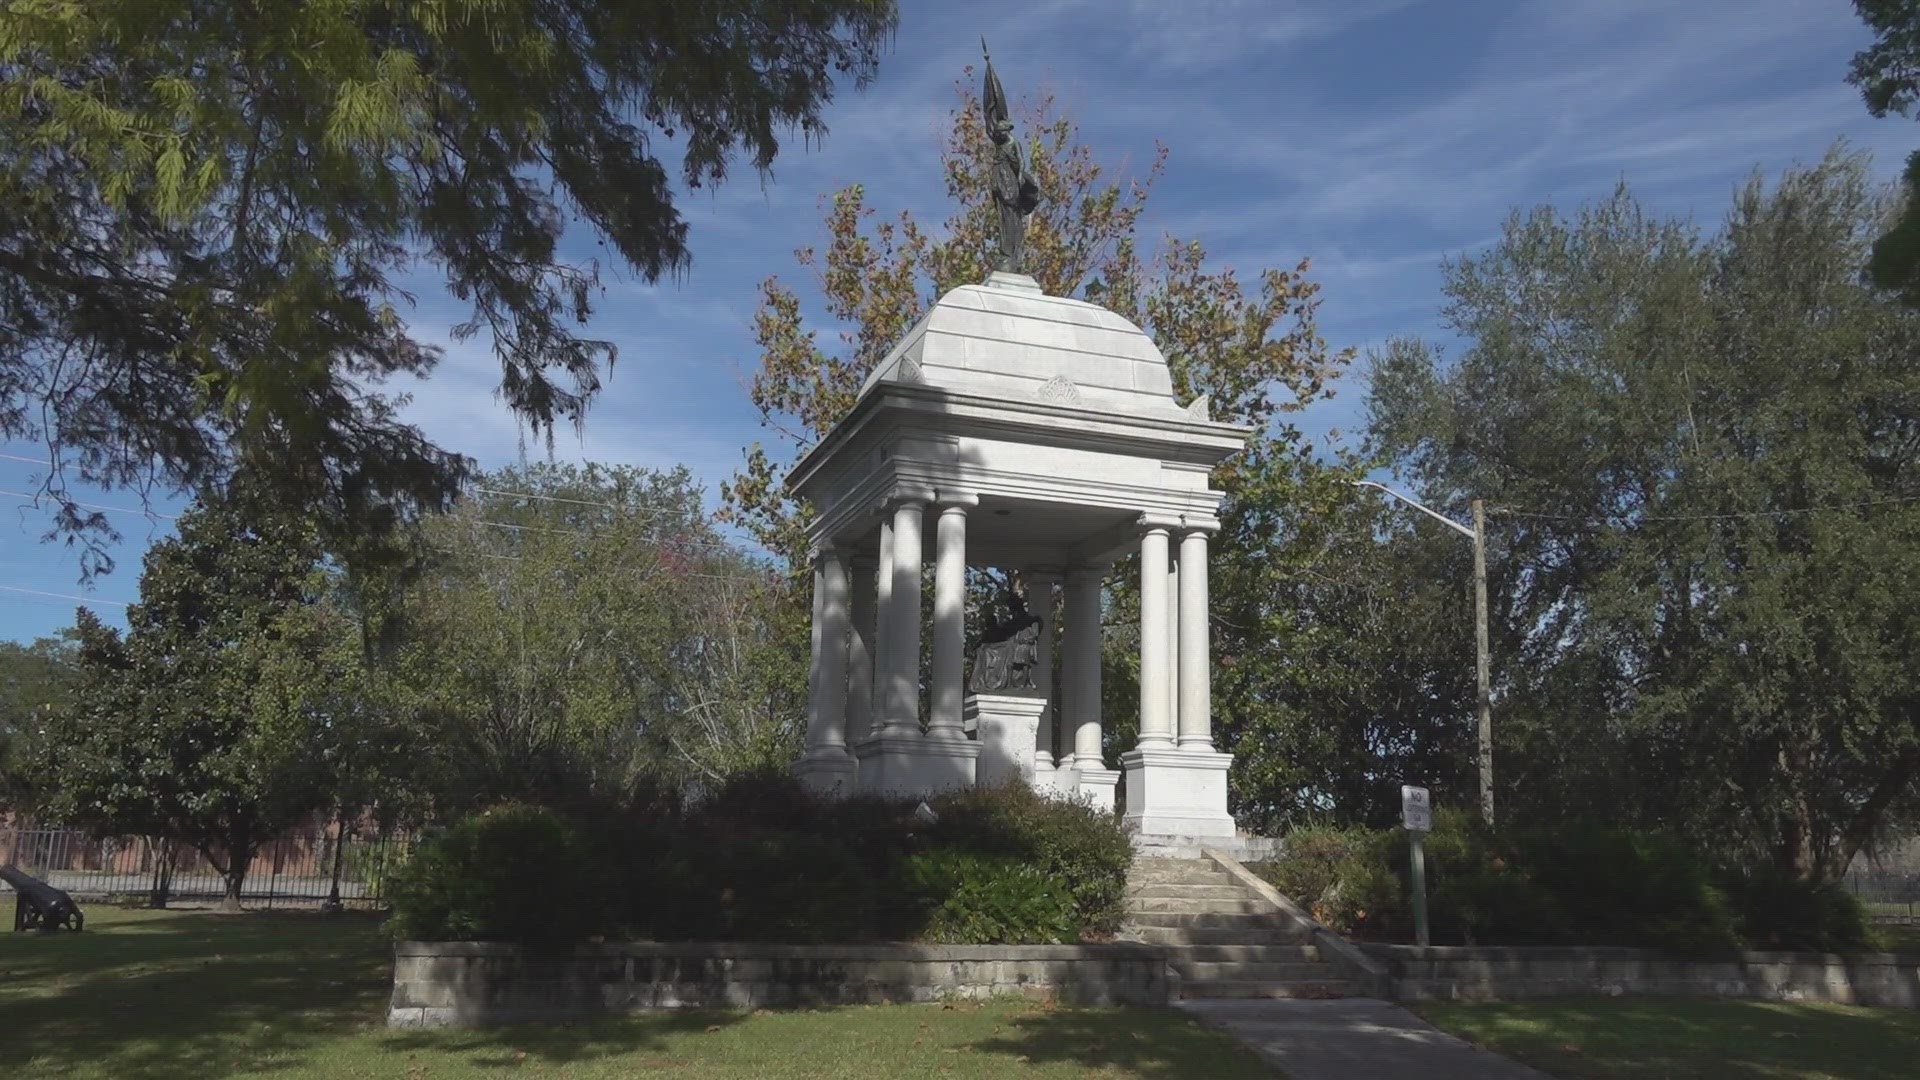 Thursday state rep., Dean Black, filed a bill protecting historic monuments from removal. A bill Mayor Deegan called a "slap in the face" to the Black community.